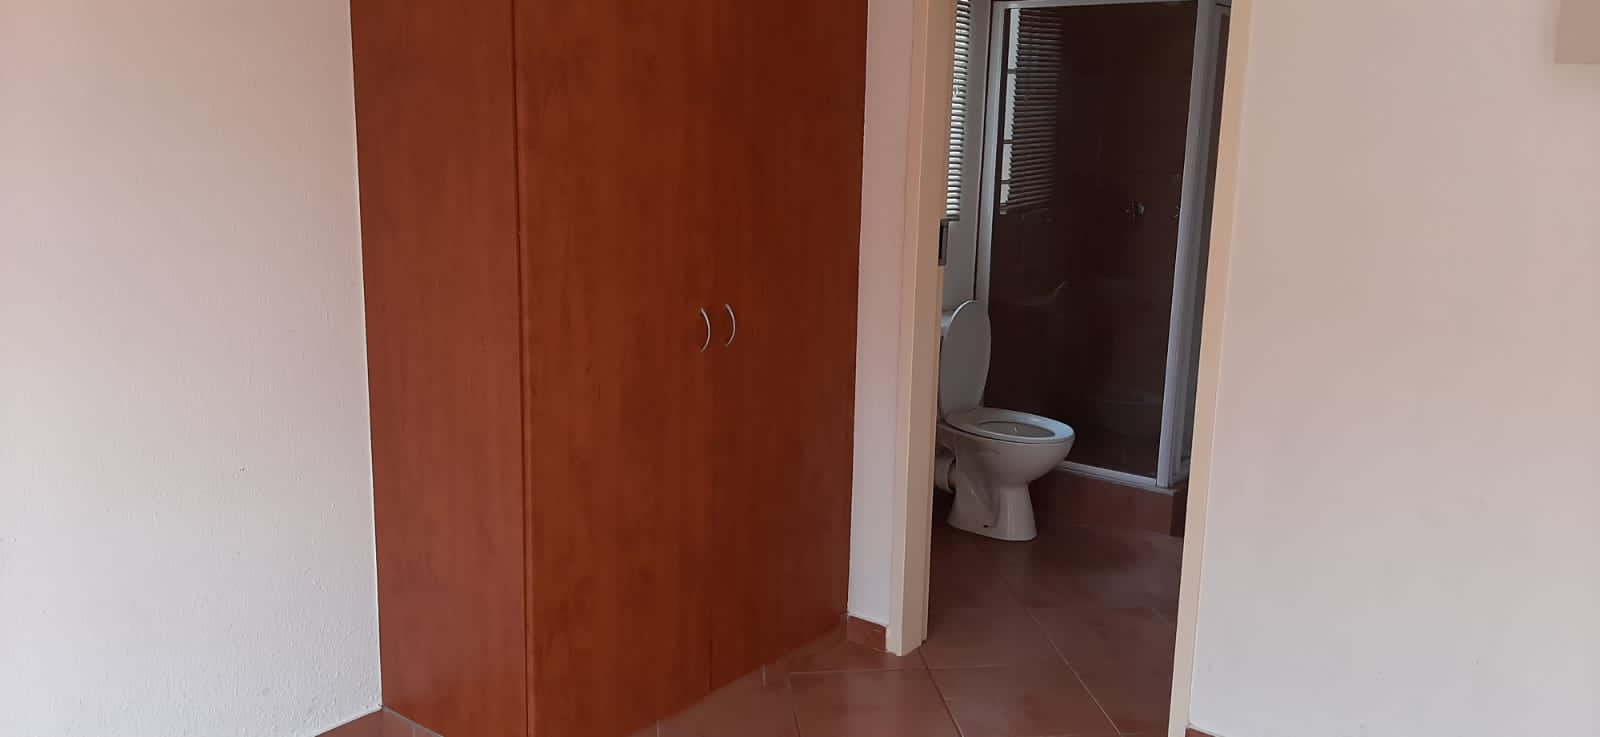 To Let 3 Bedroom Property for Rent in Nellmapius Gauteng